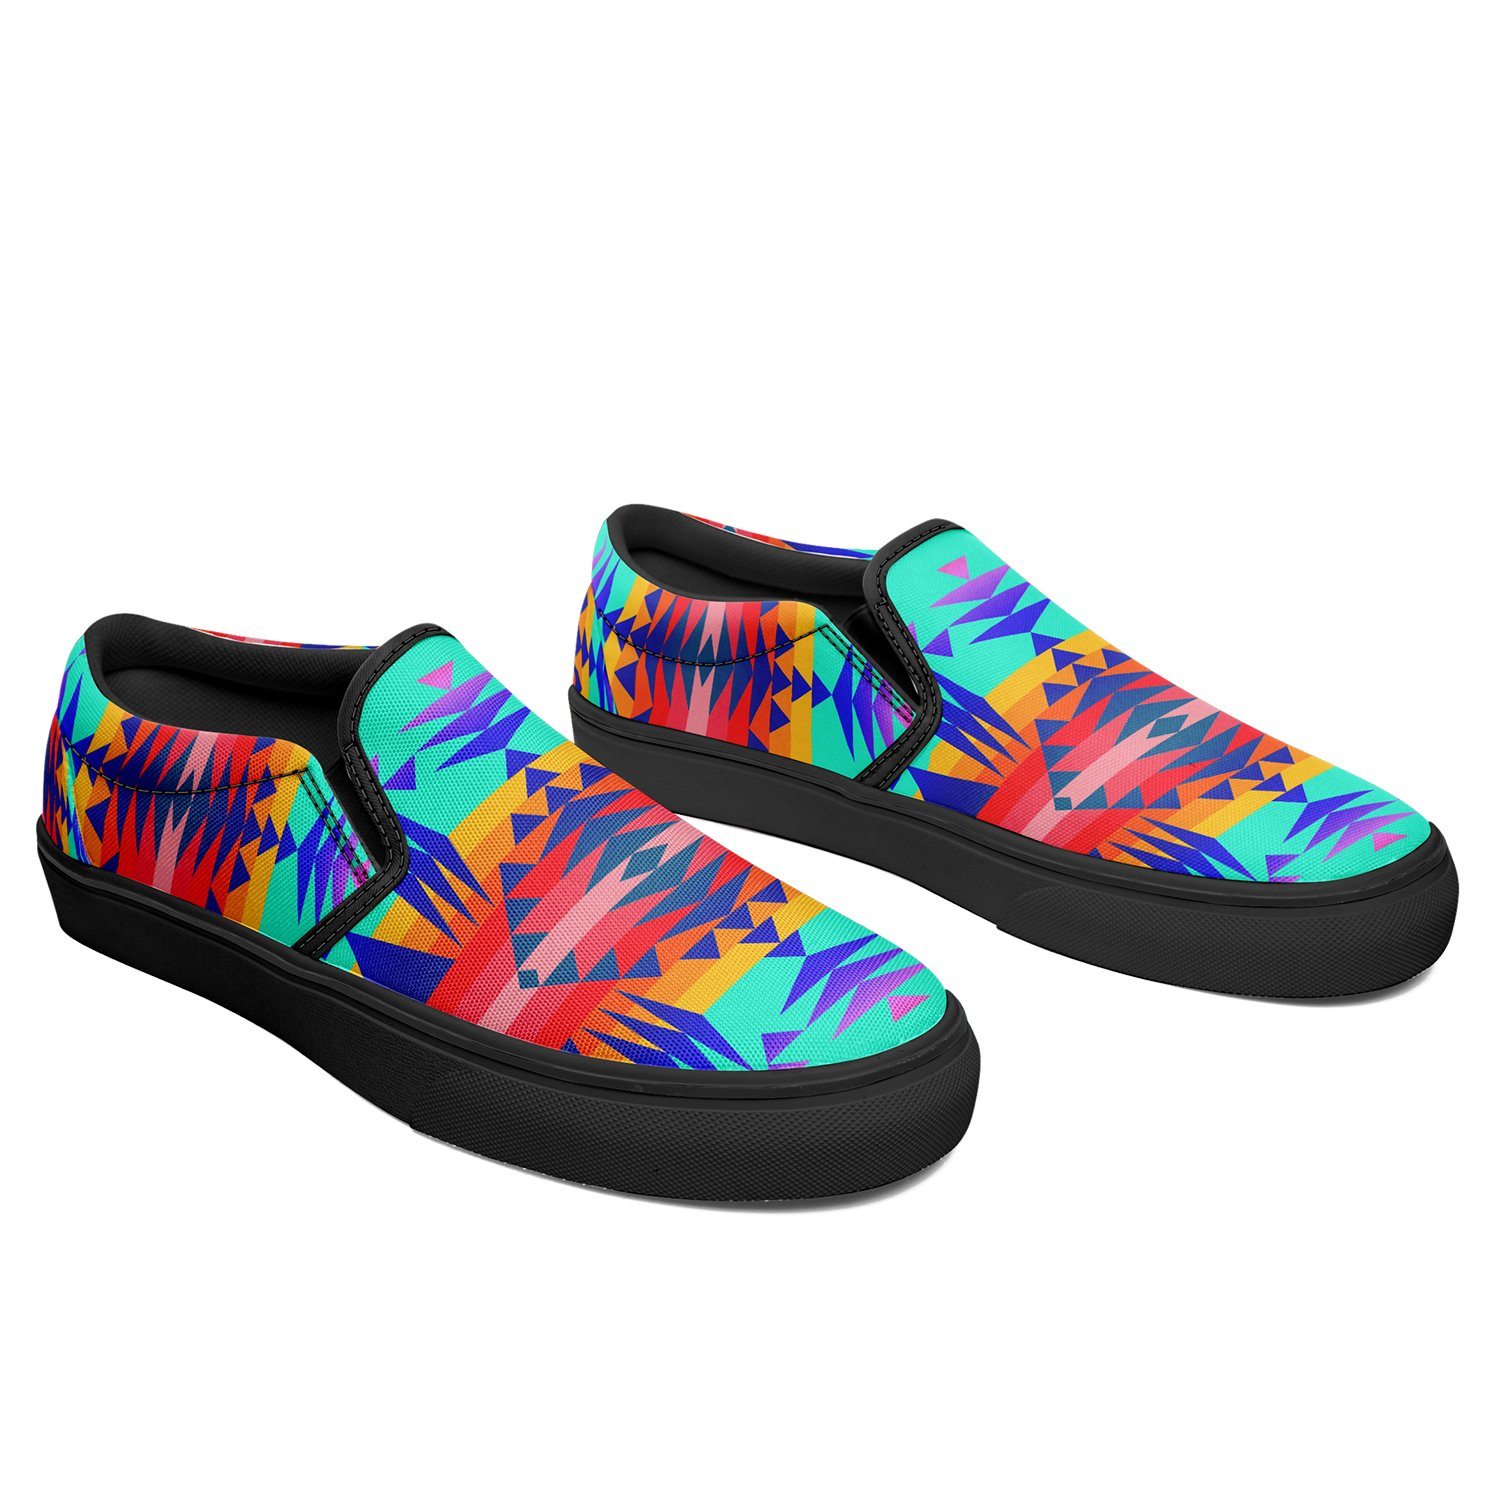 Between the Mountains Spring Otoyimm Canvas Slip On Shoes 49 Dzine 